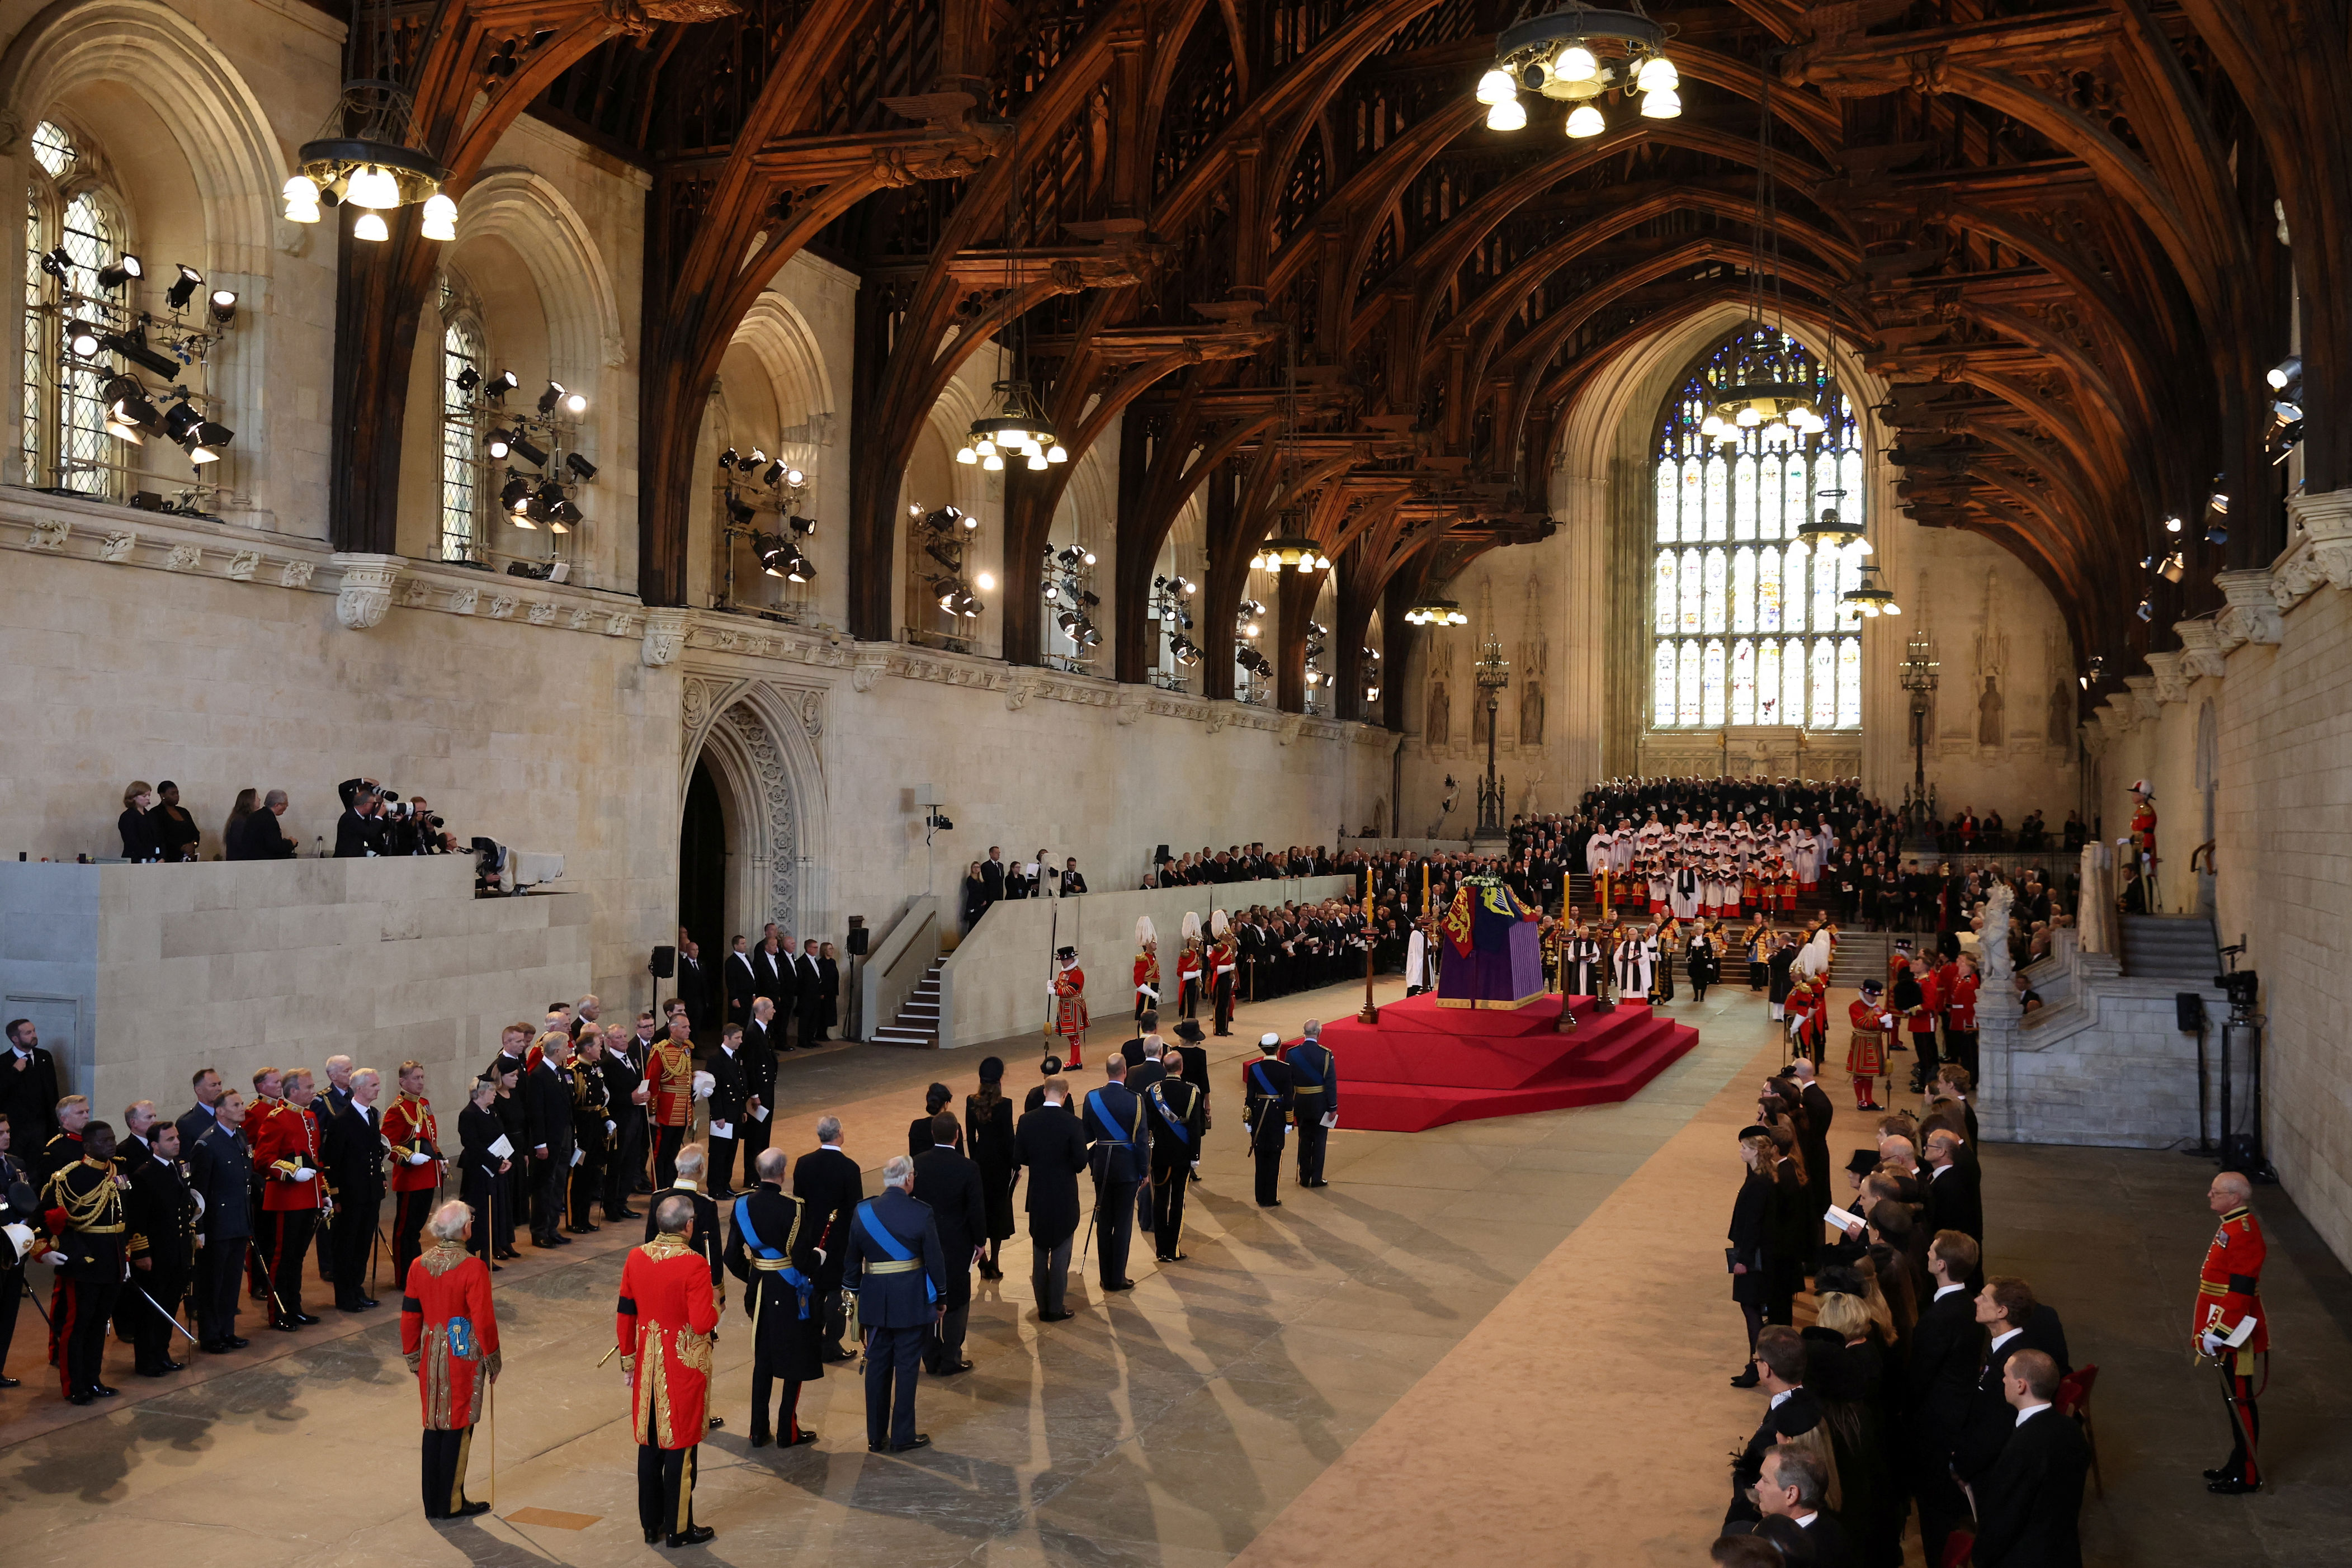 <p>The royal family stands behind the coffin of Queen Elizabeth II, adorned with a royal standard and the Imperial State Crown, after her body arrived at Westminster Hall from Buckingham Palace in London for her lying-in-state on Sept. 14, 2022. </p>